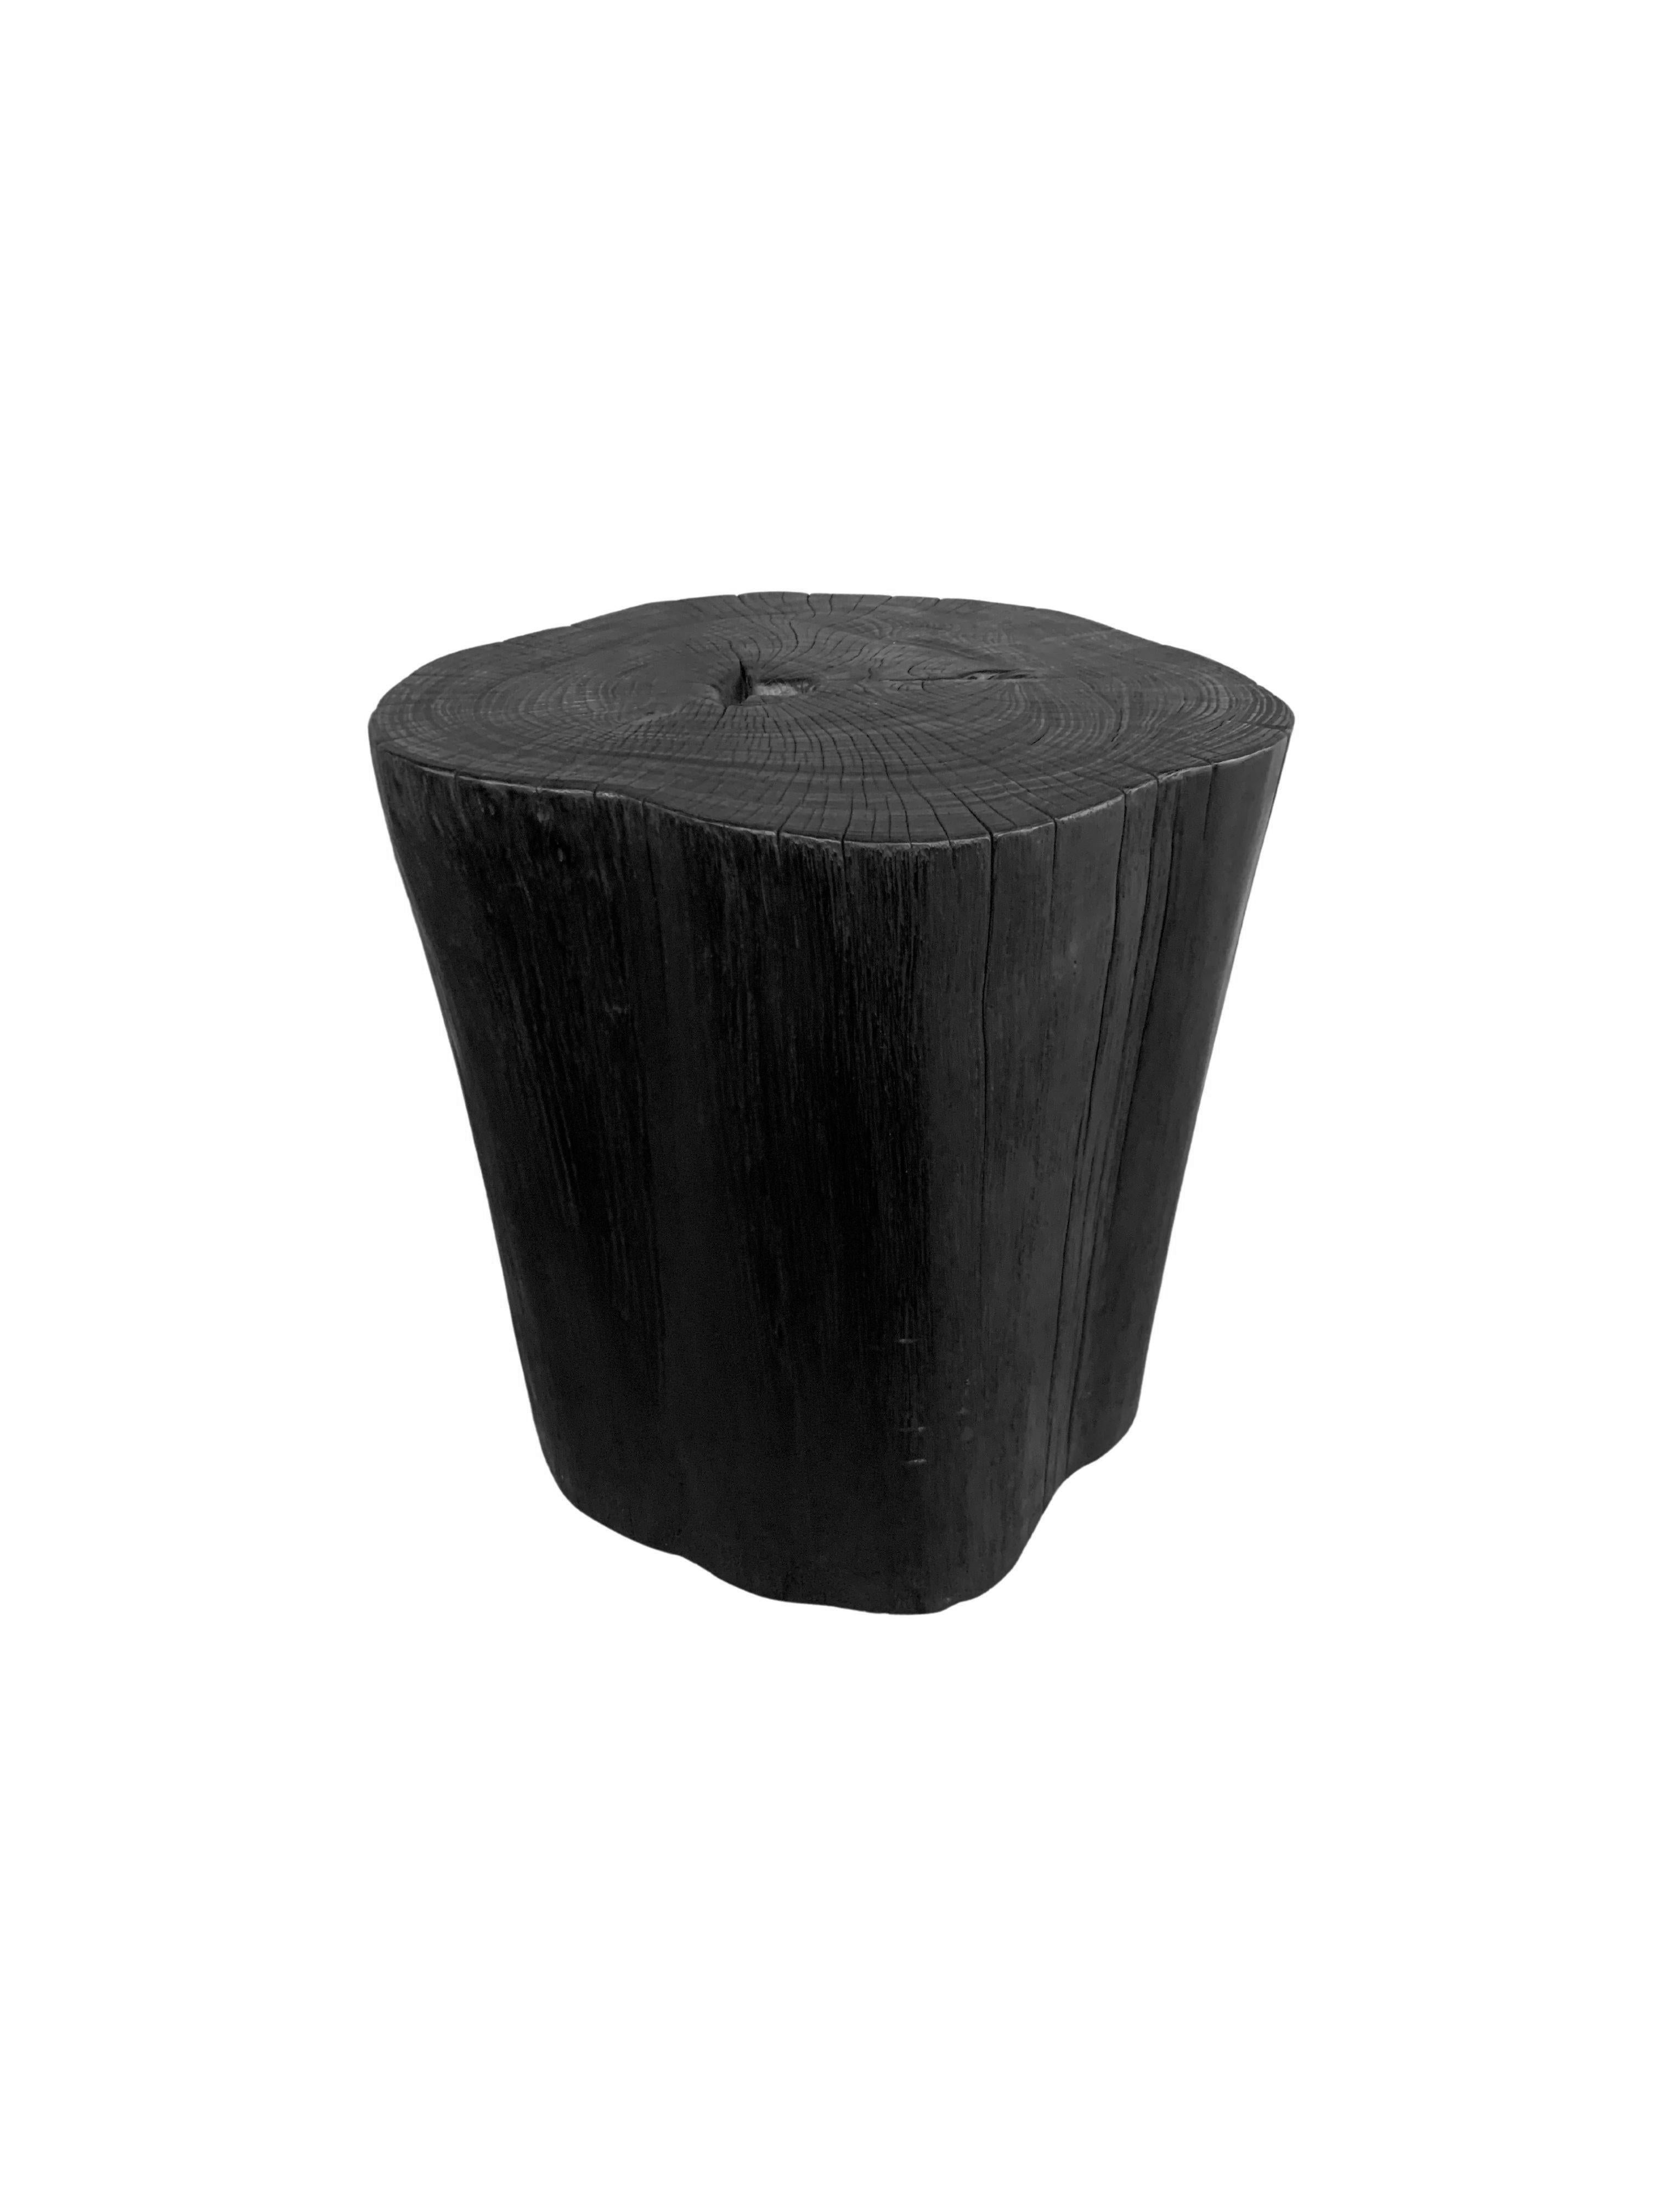 Contemporary Tree Trunk Side Table Solid Teak Wood Burnt Finish Modern Organic For Sale